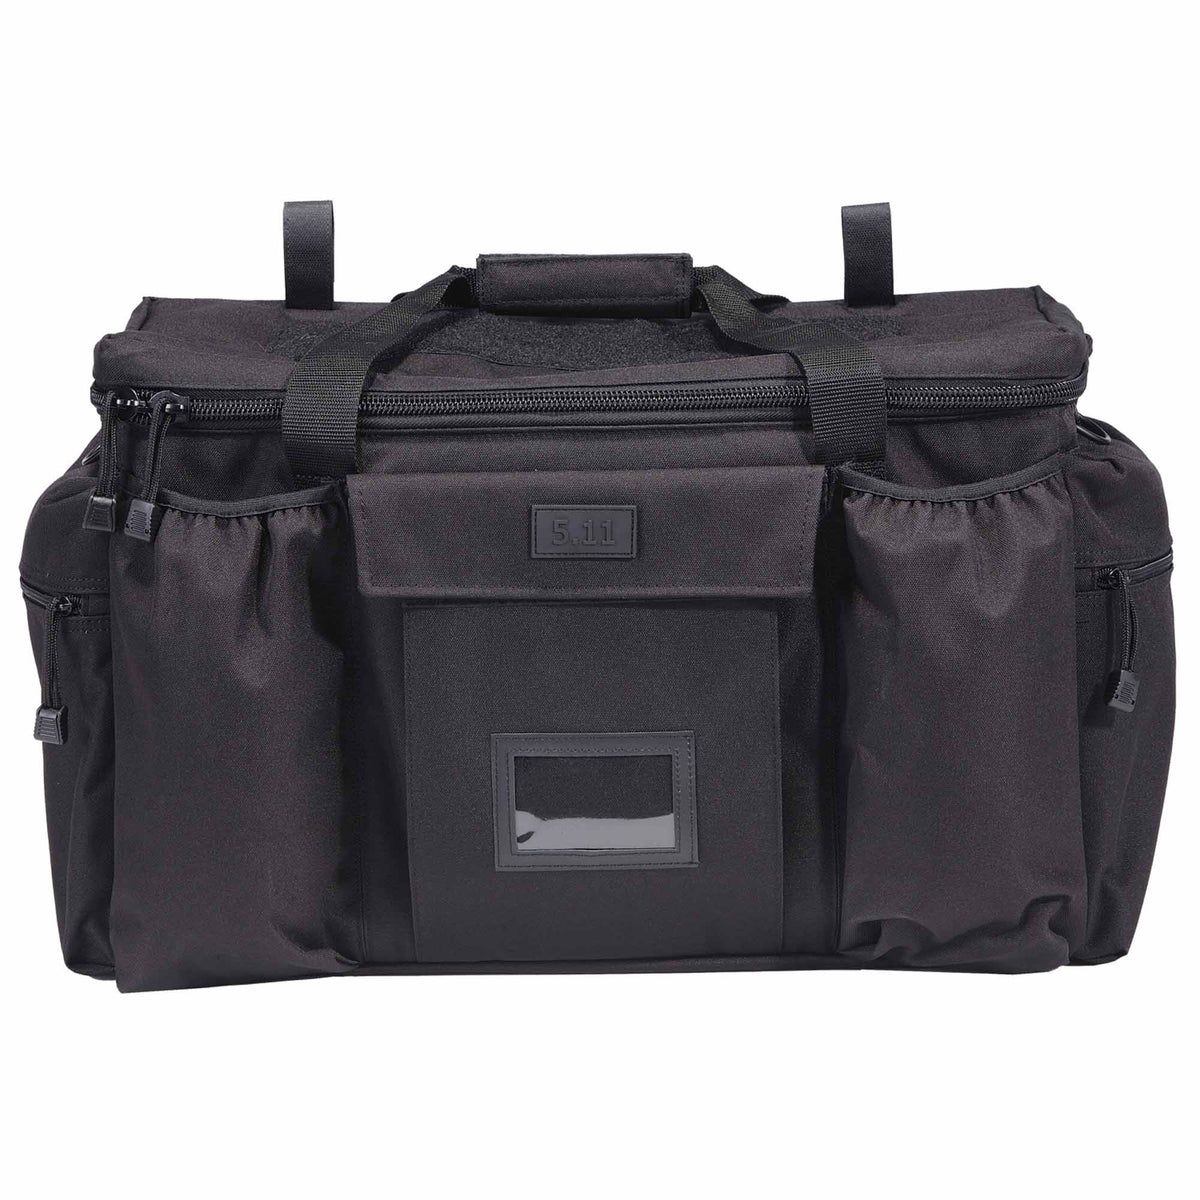 Front of 5.11 Patrol Ready Bag